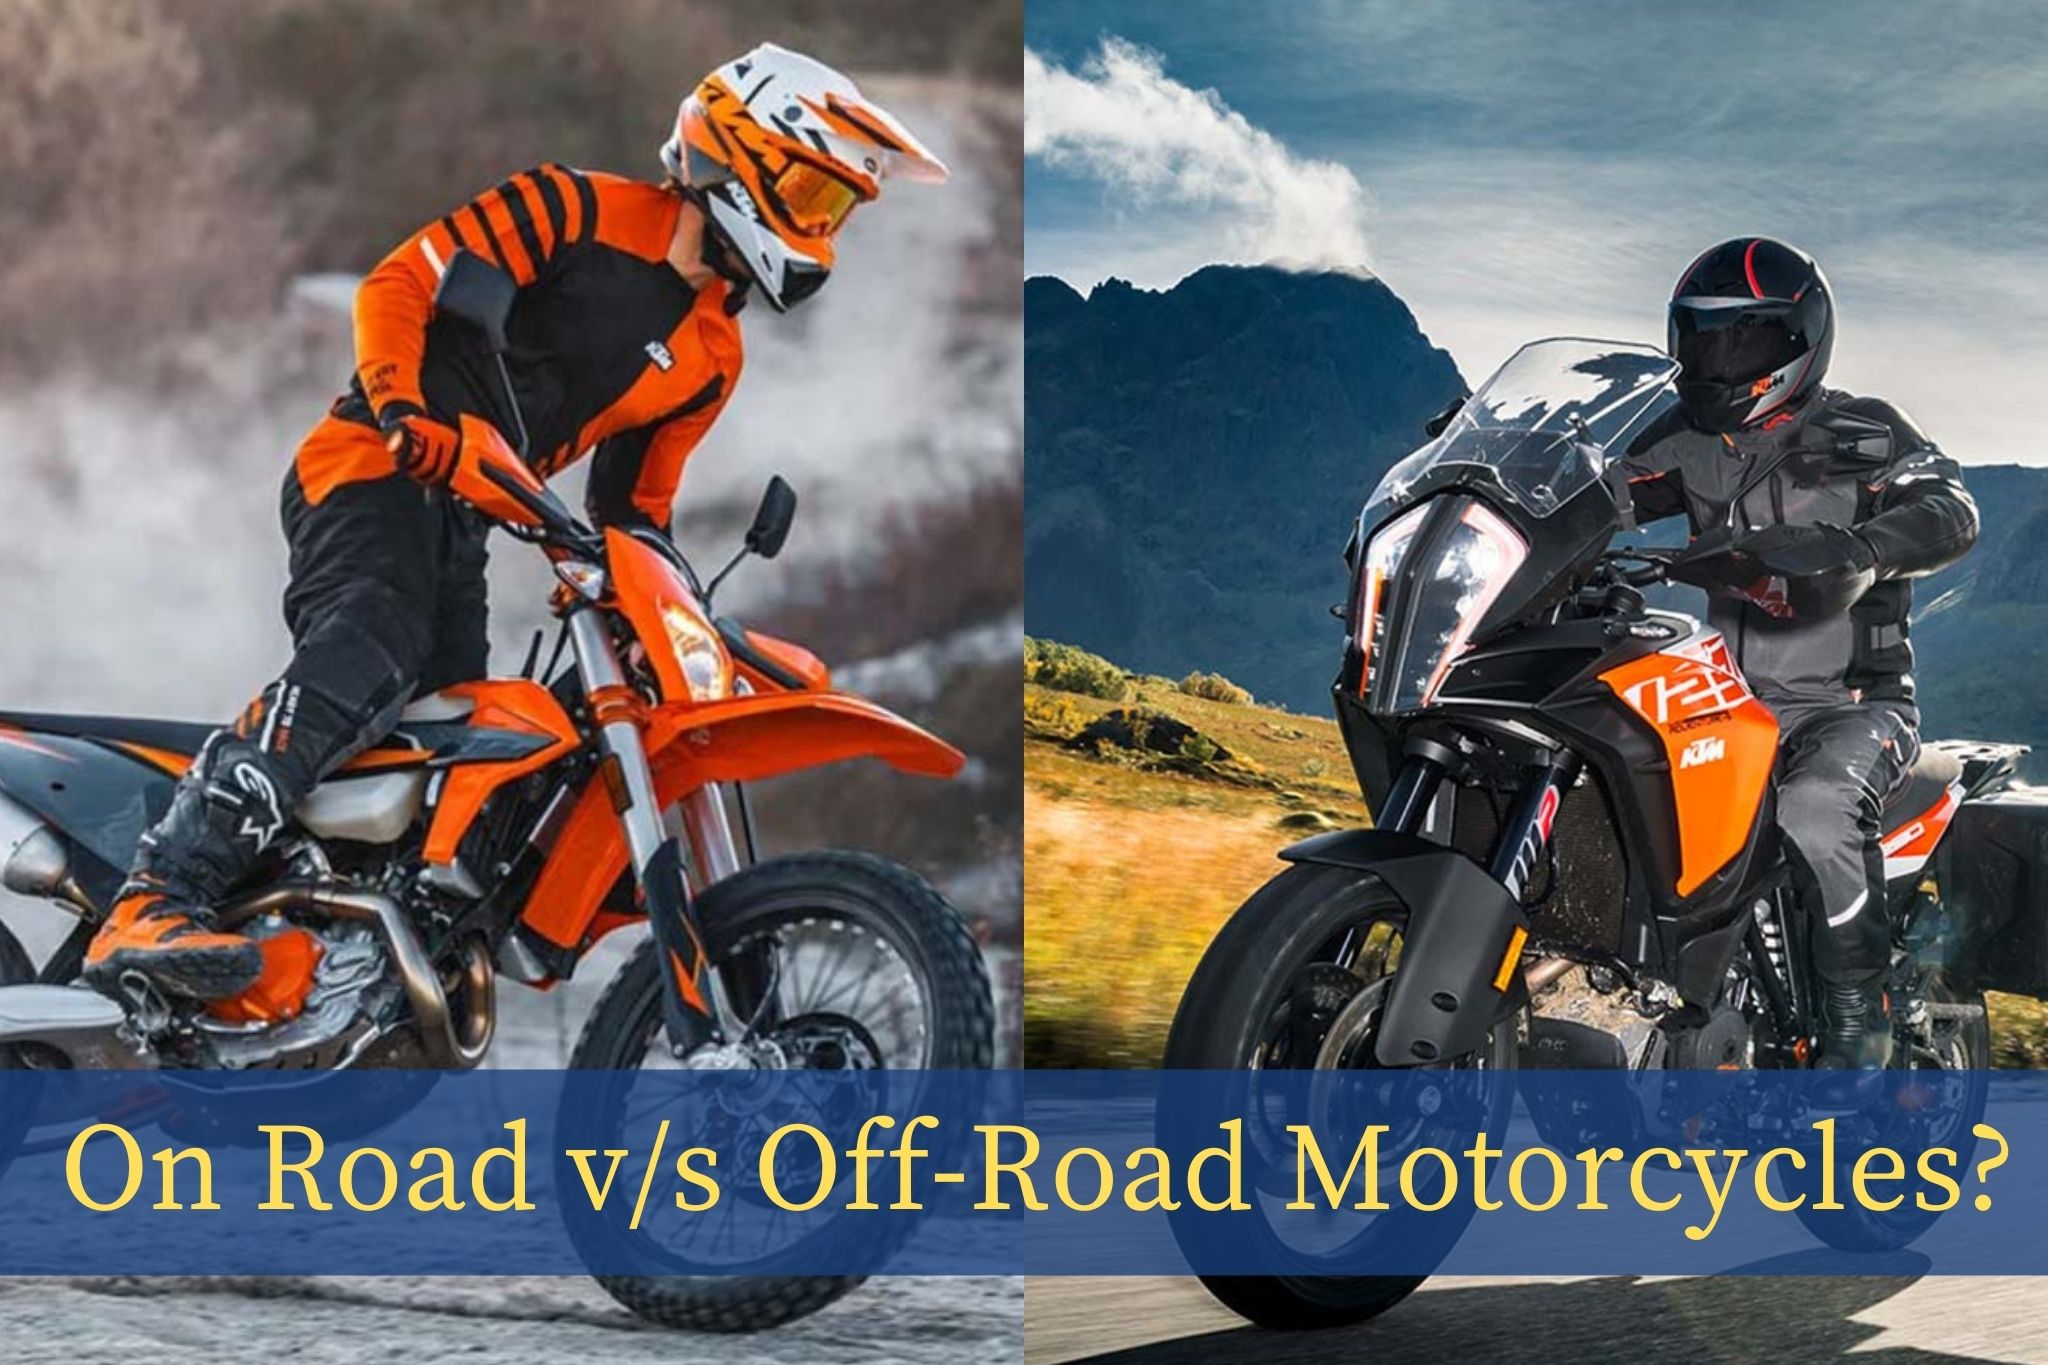 What’s the Difference Between On and Off-Road Motorcycles?